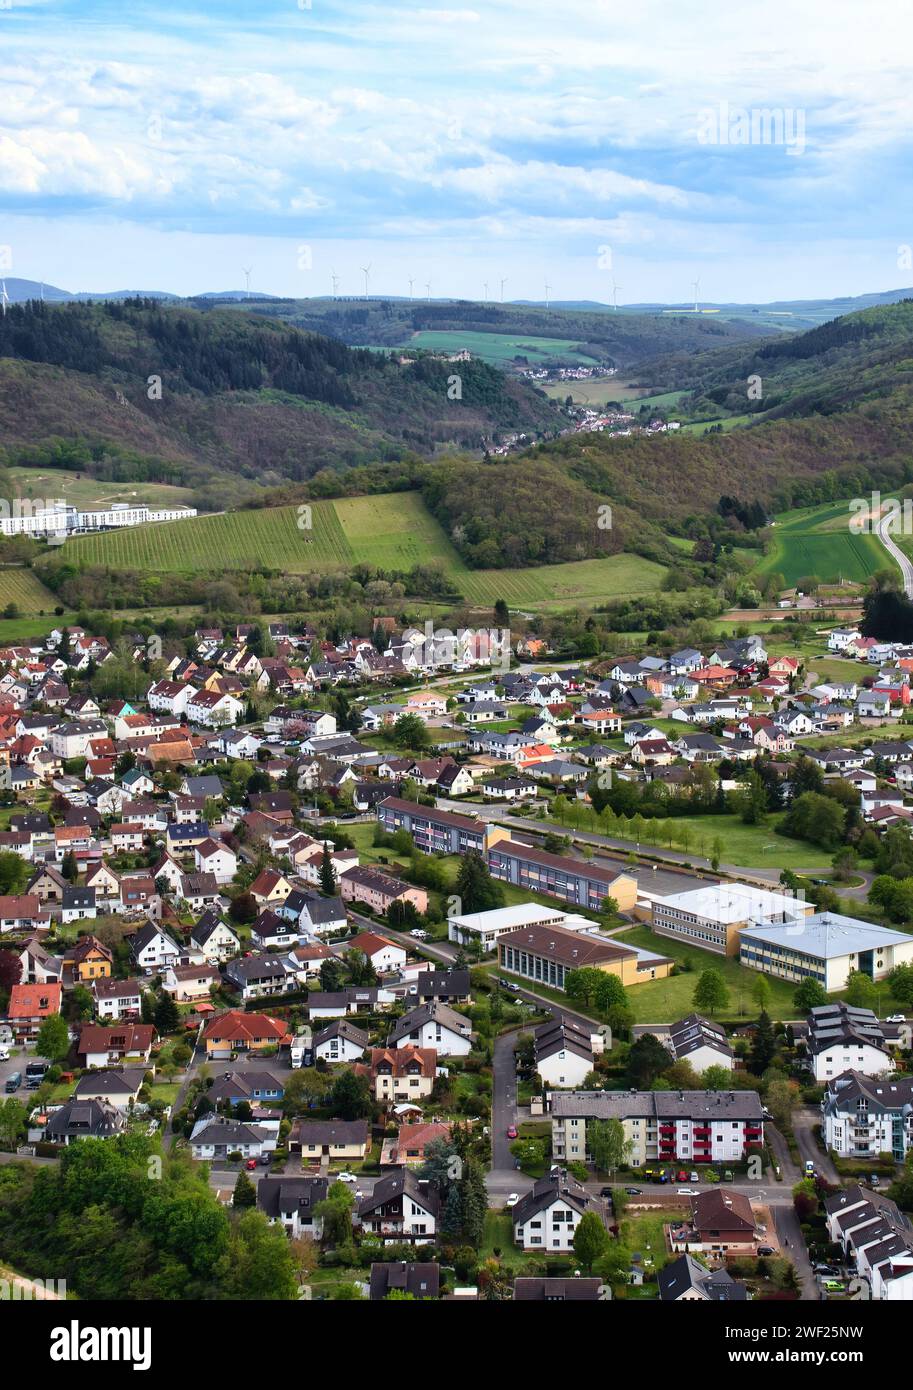 Bad Munster, Germany - May 9, 2021: Houses and buildings in a German town below Rotenfels on a spring day in Rhineland Palatinate, Germany. Stock Photo